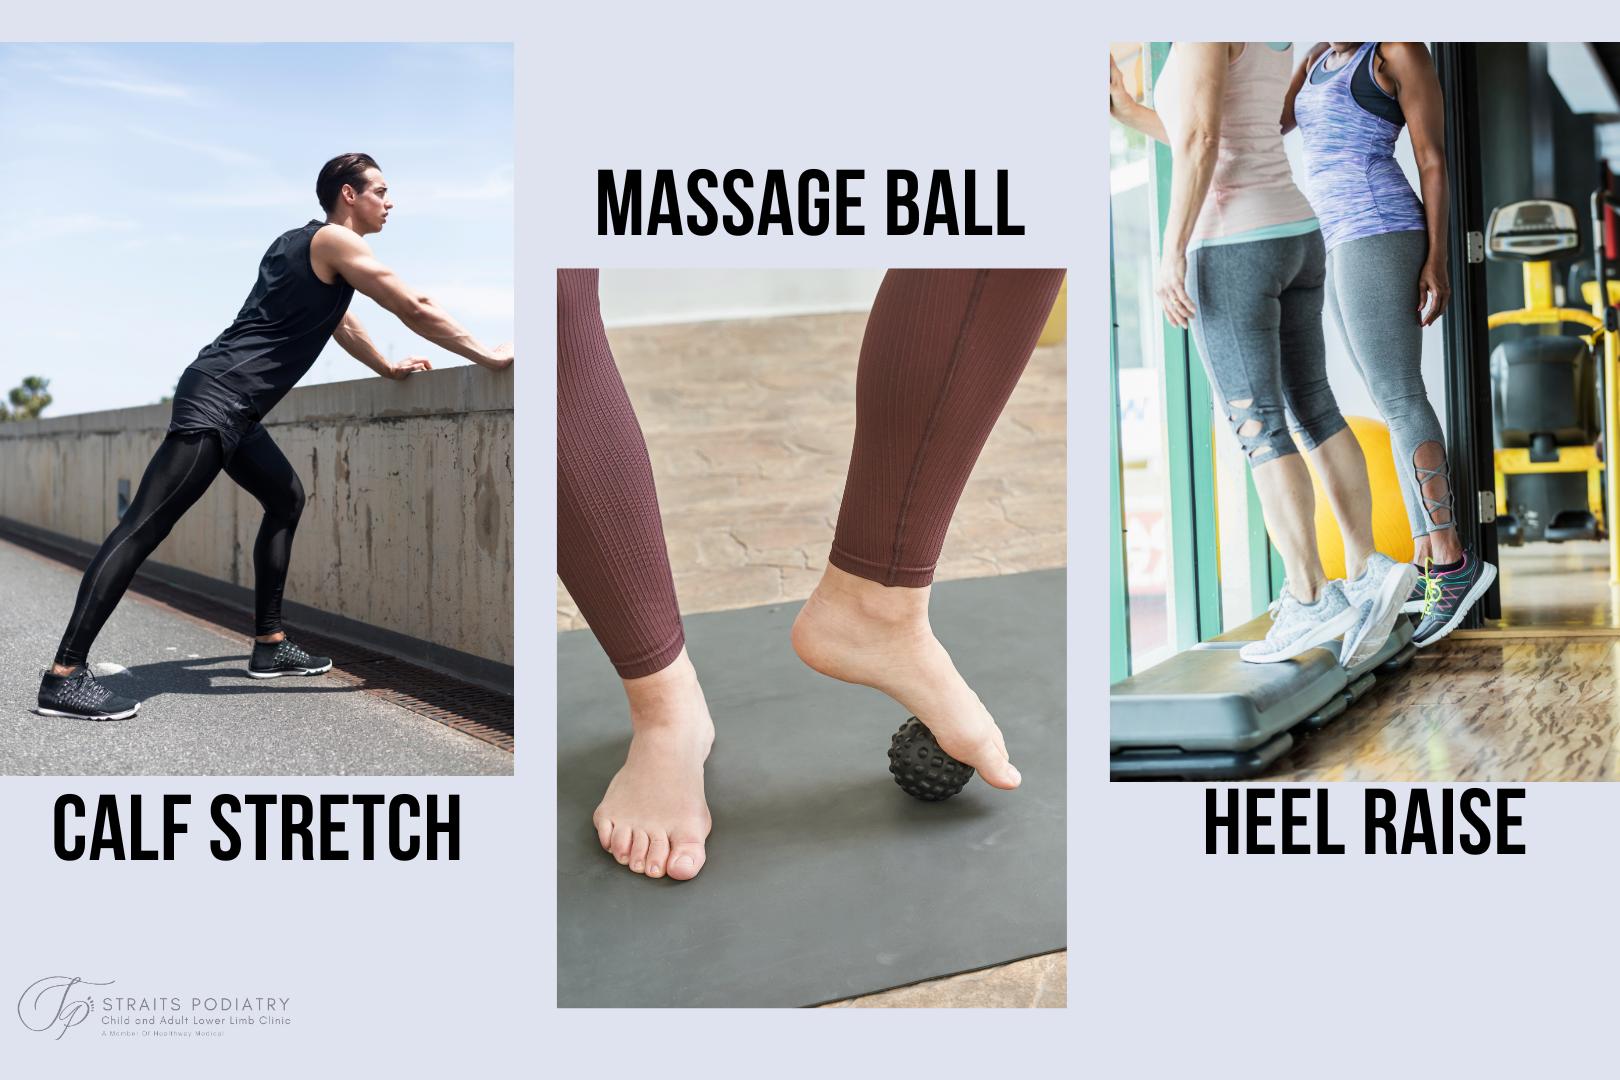 Plantar fasciitis exercises by Straits Podiatry in Singapore. Photo showing the different type of stretching and strengthening exercises that can help to manage plantar fasciitis.